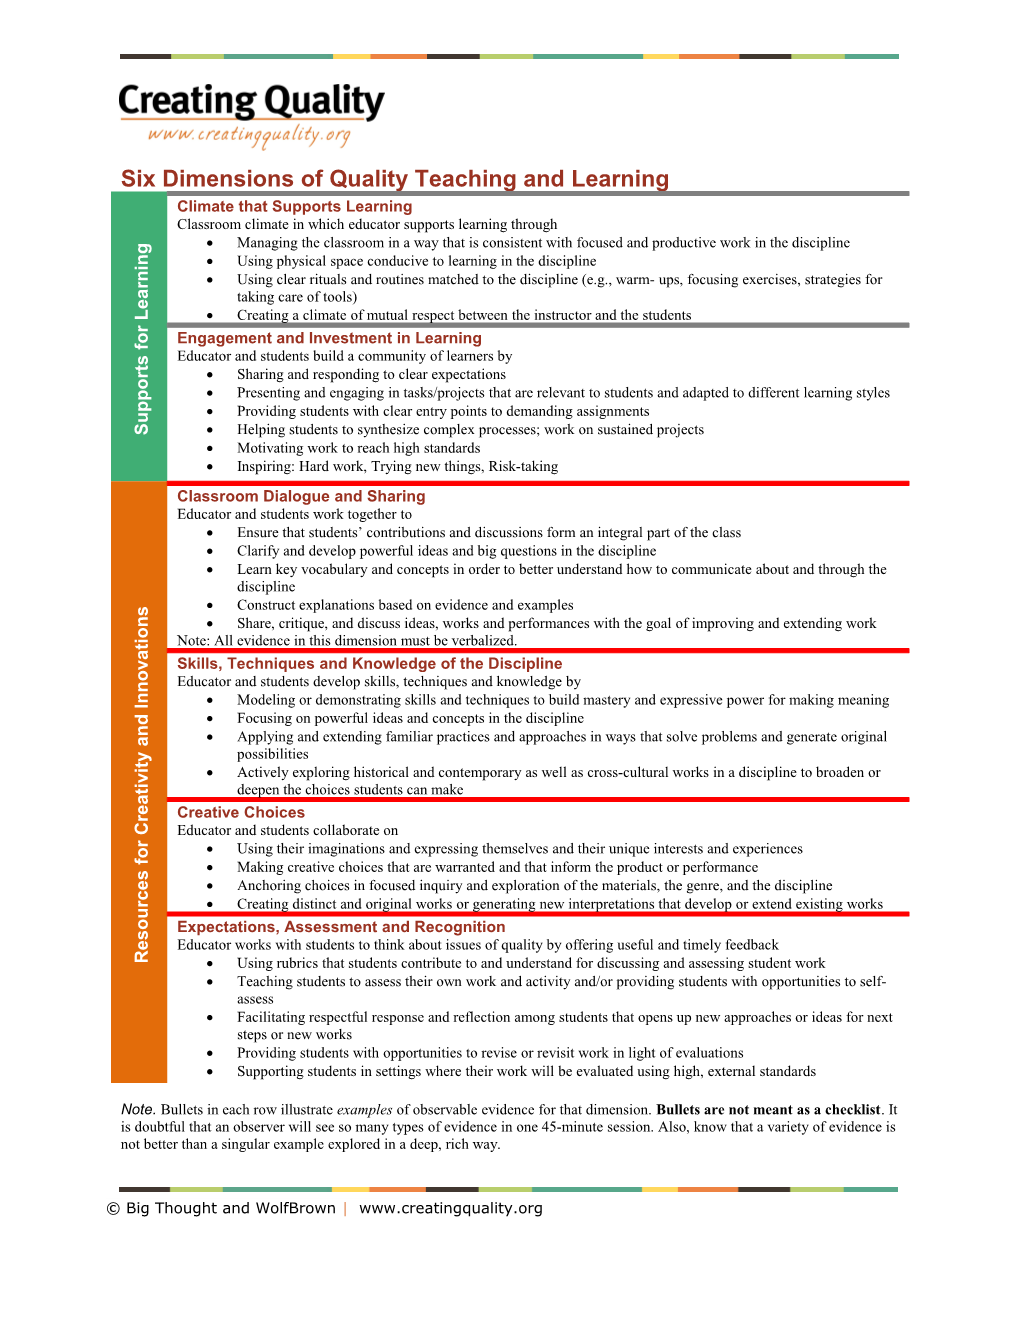 Six Dimensions of Quality Teaching and Learning